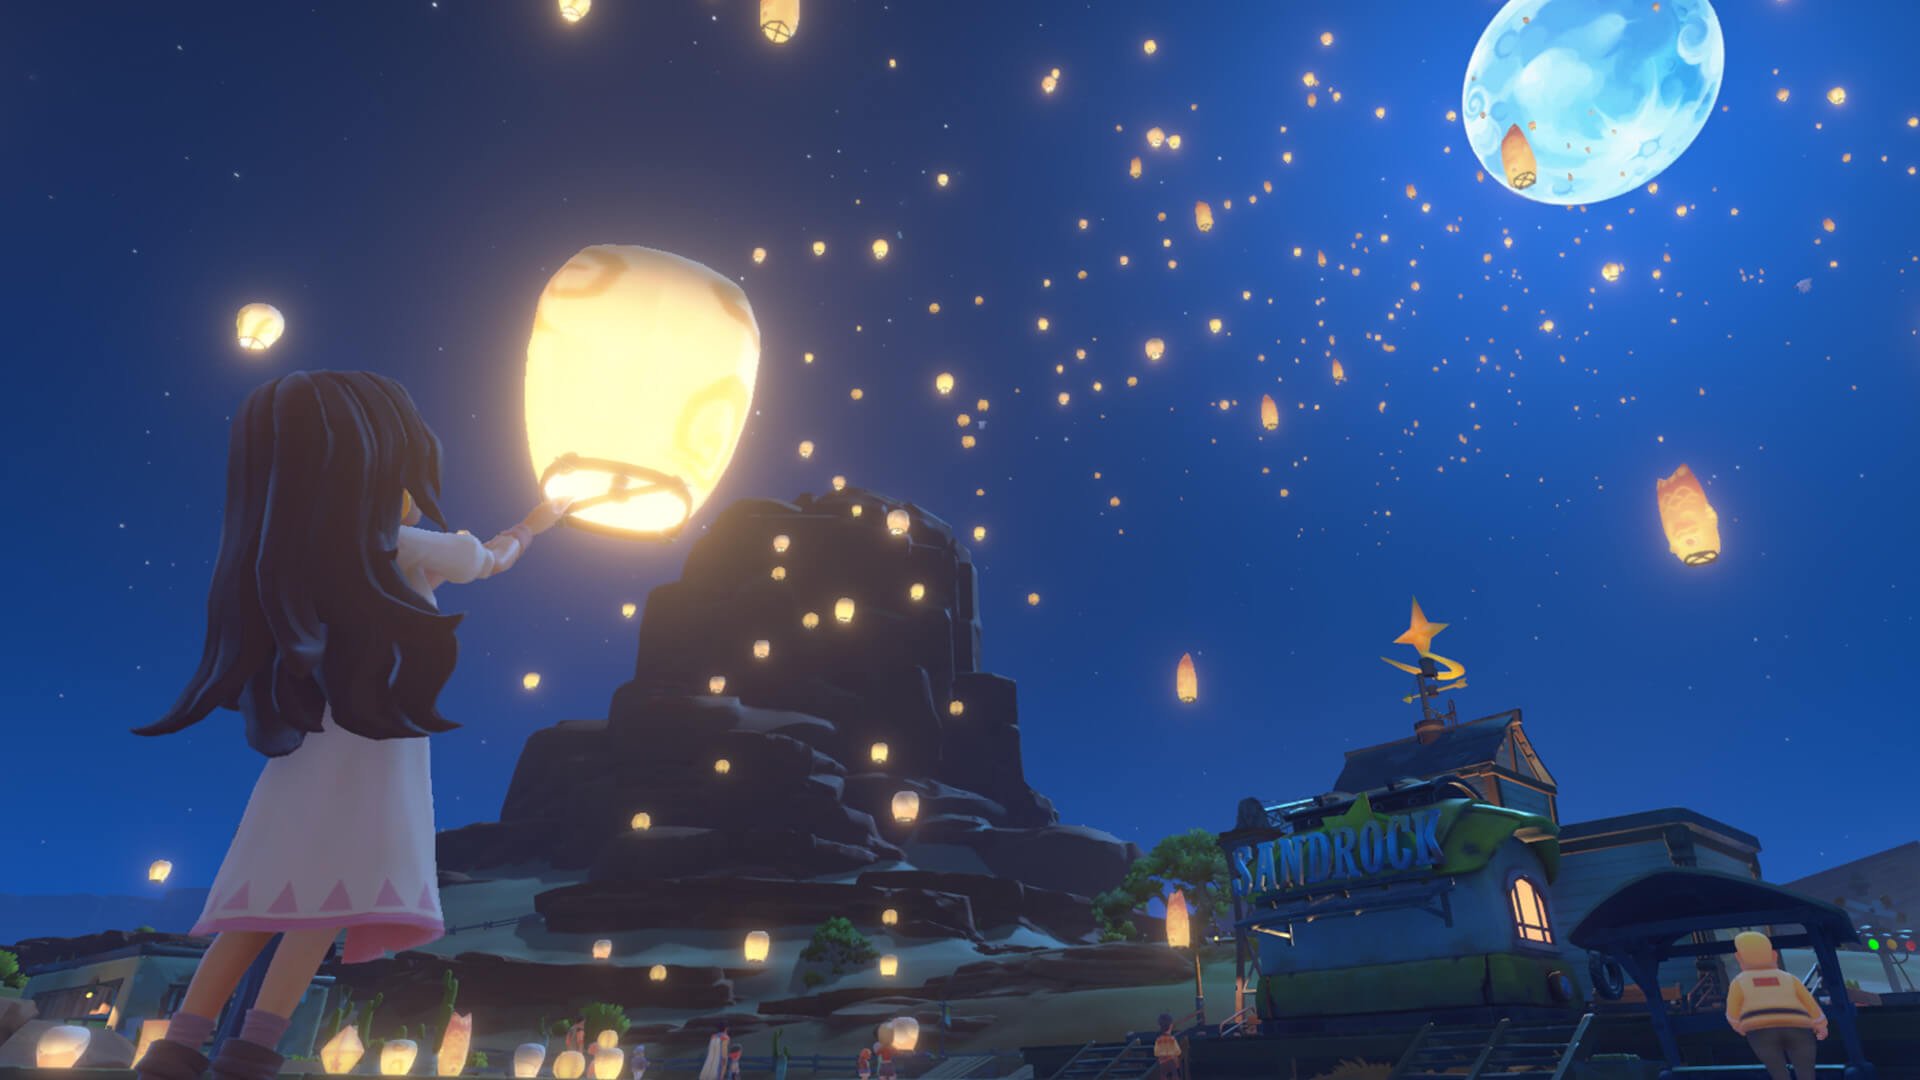 My Time at Sandrock screenshot showing a dark sky and a character playing with fireflies.